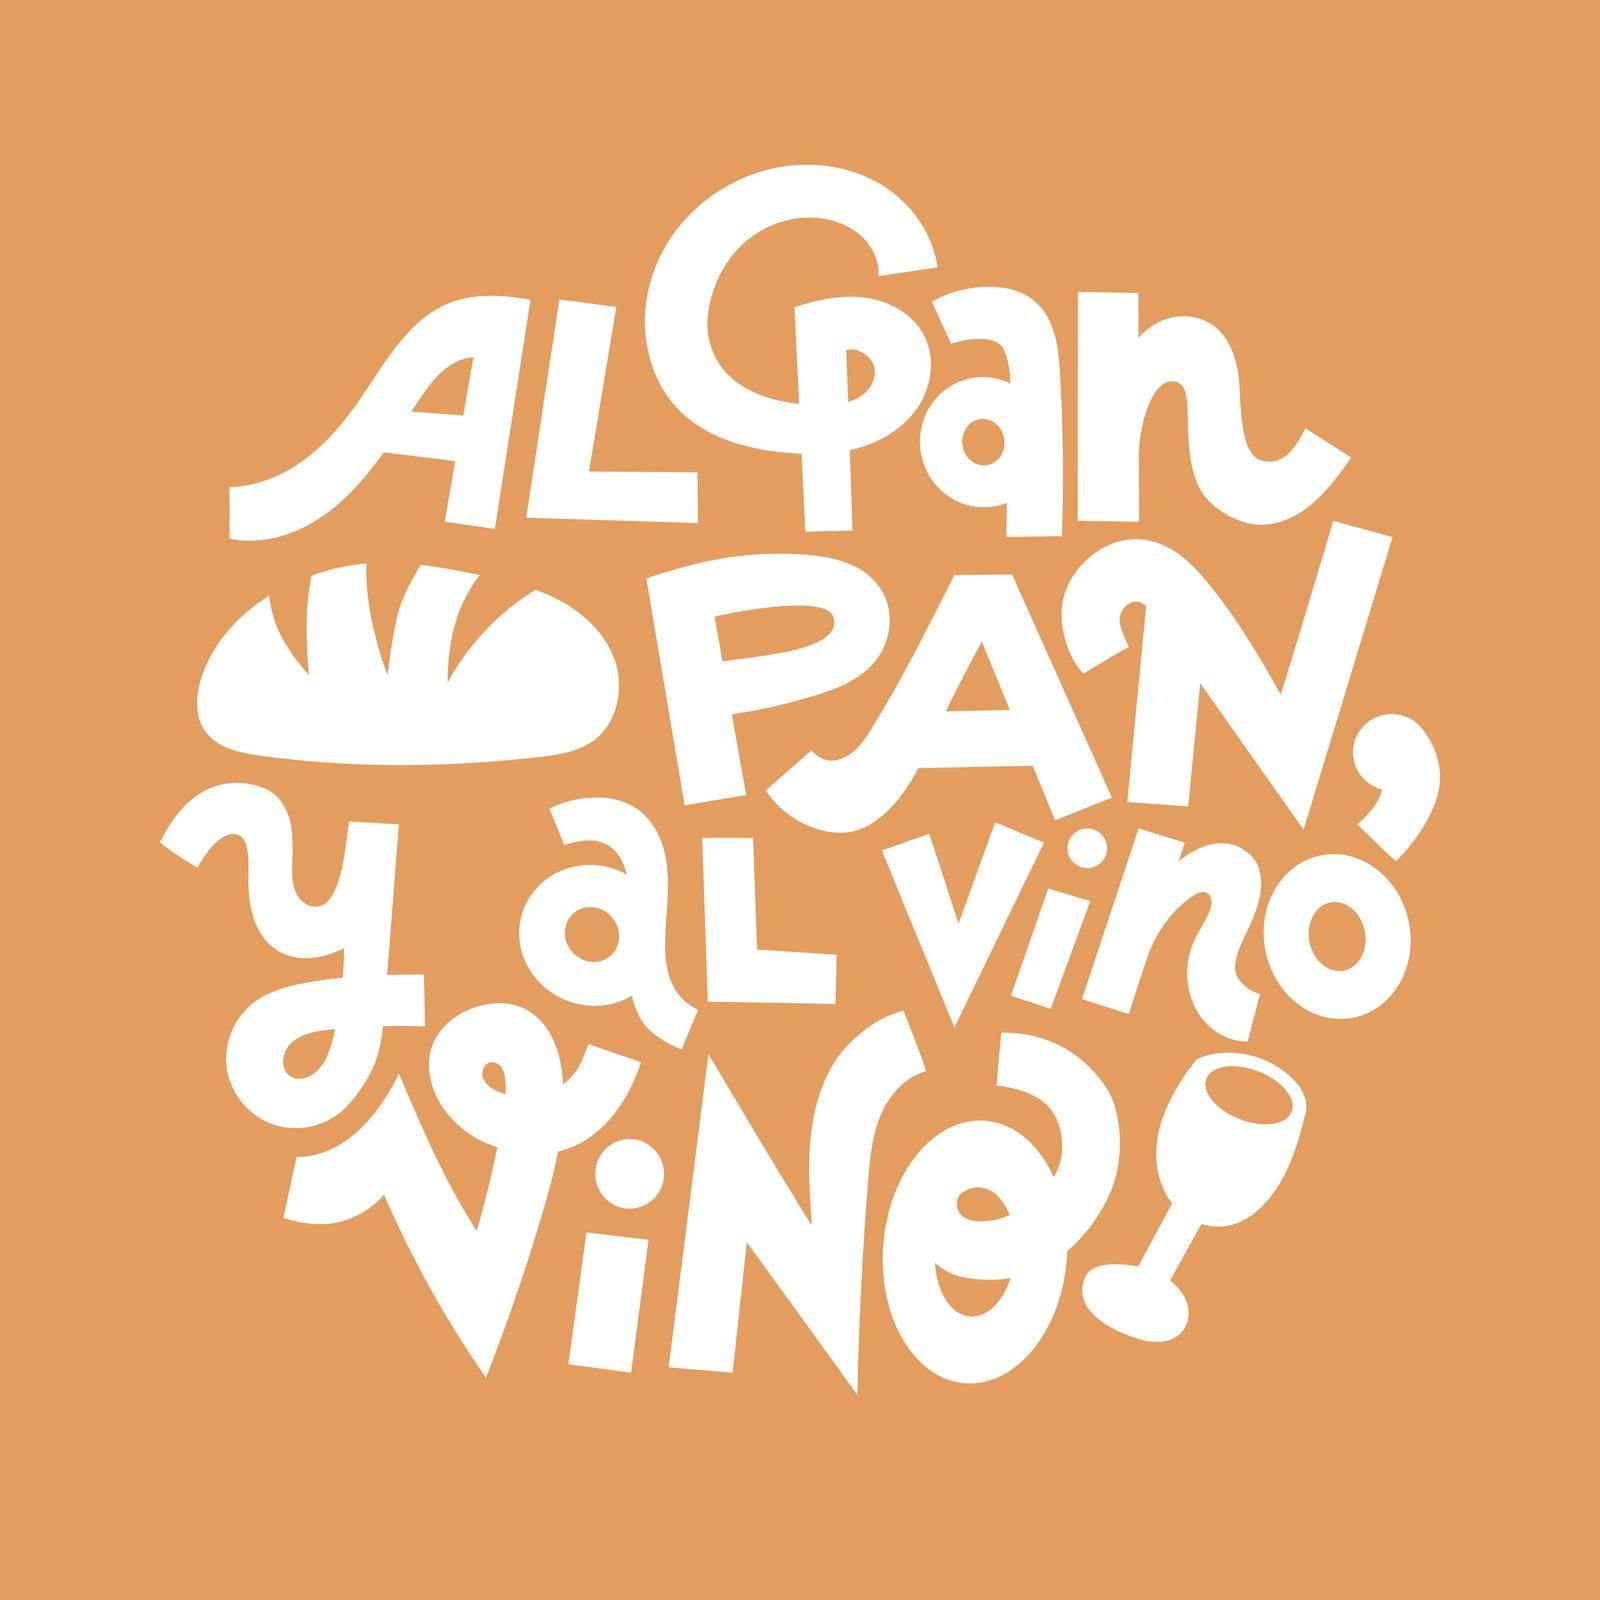 Calling the bread bread and the wine wine. Spanish saying about bread. Hand drawn lettering print for T-shirts, tote bags, mugs etc. Single color vector for cutting.